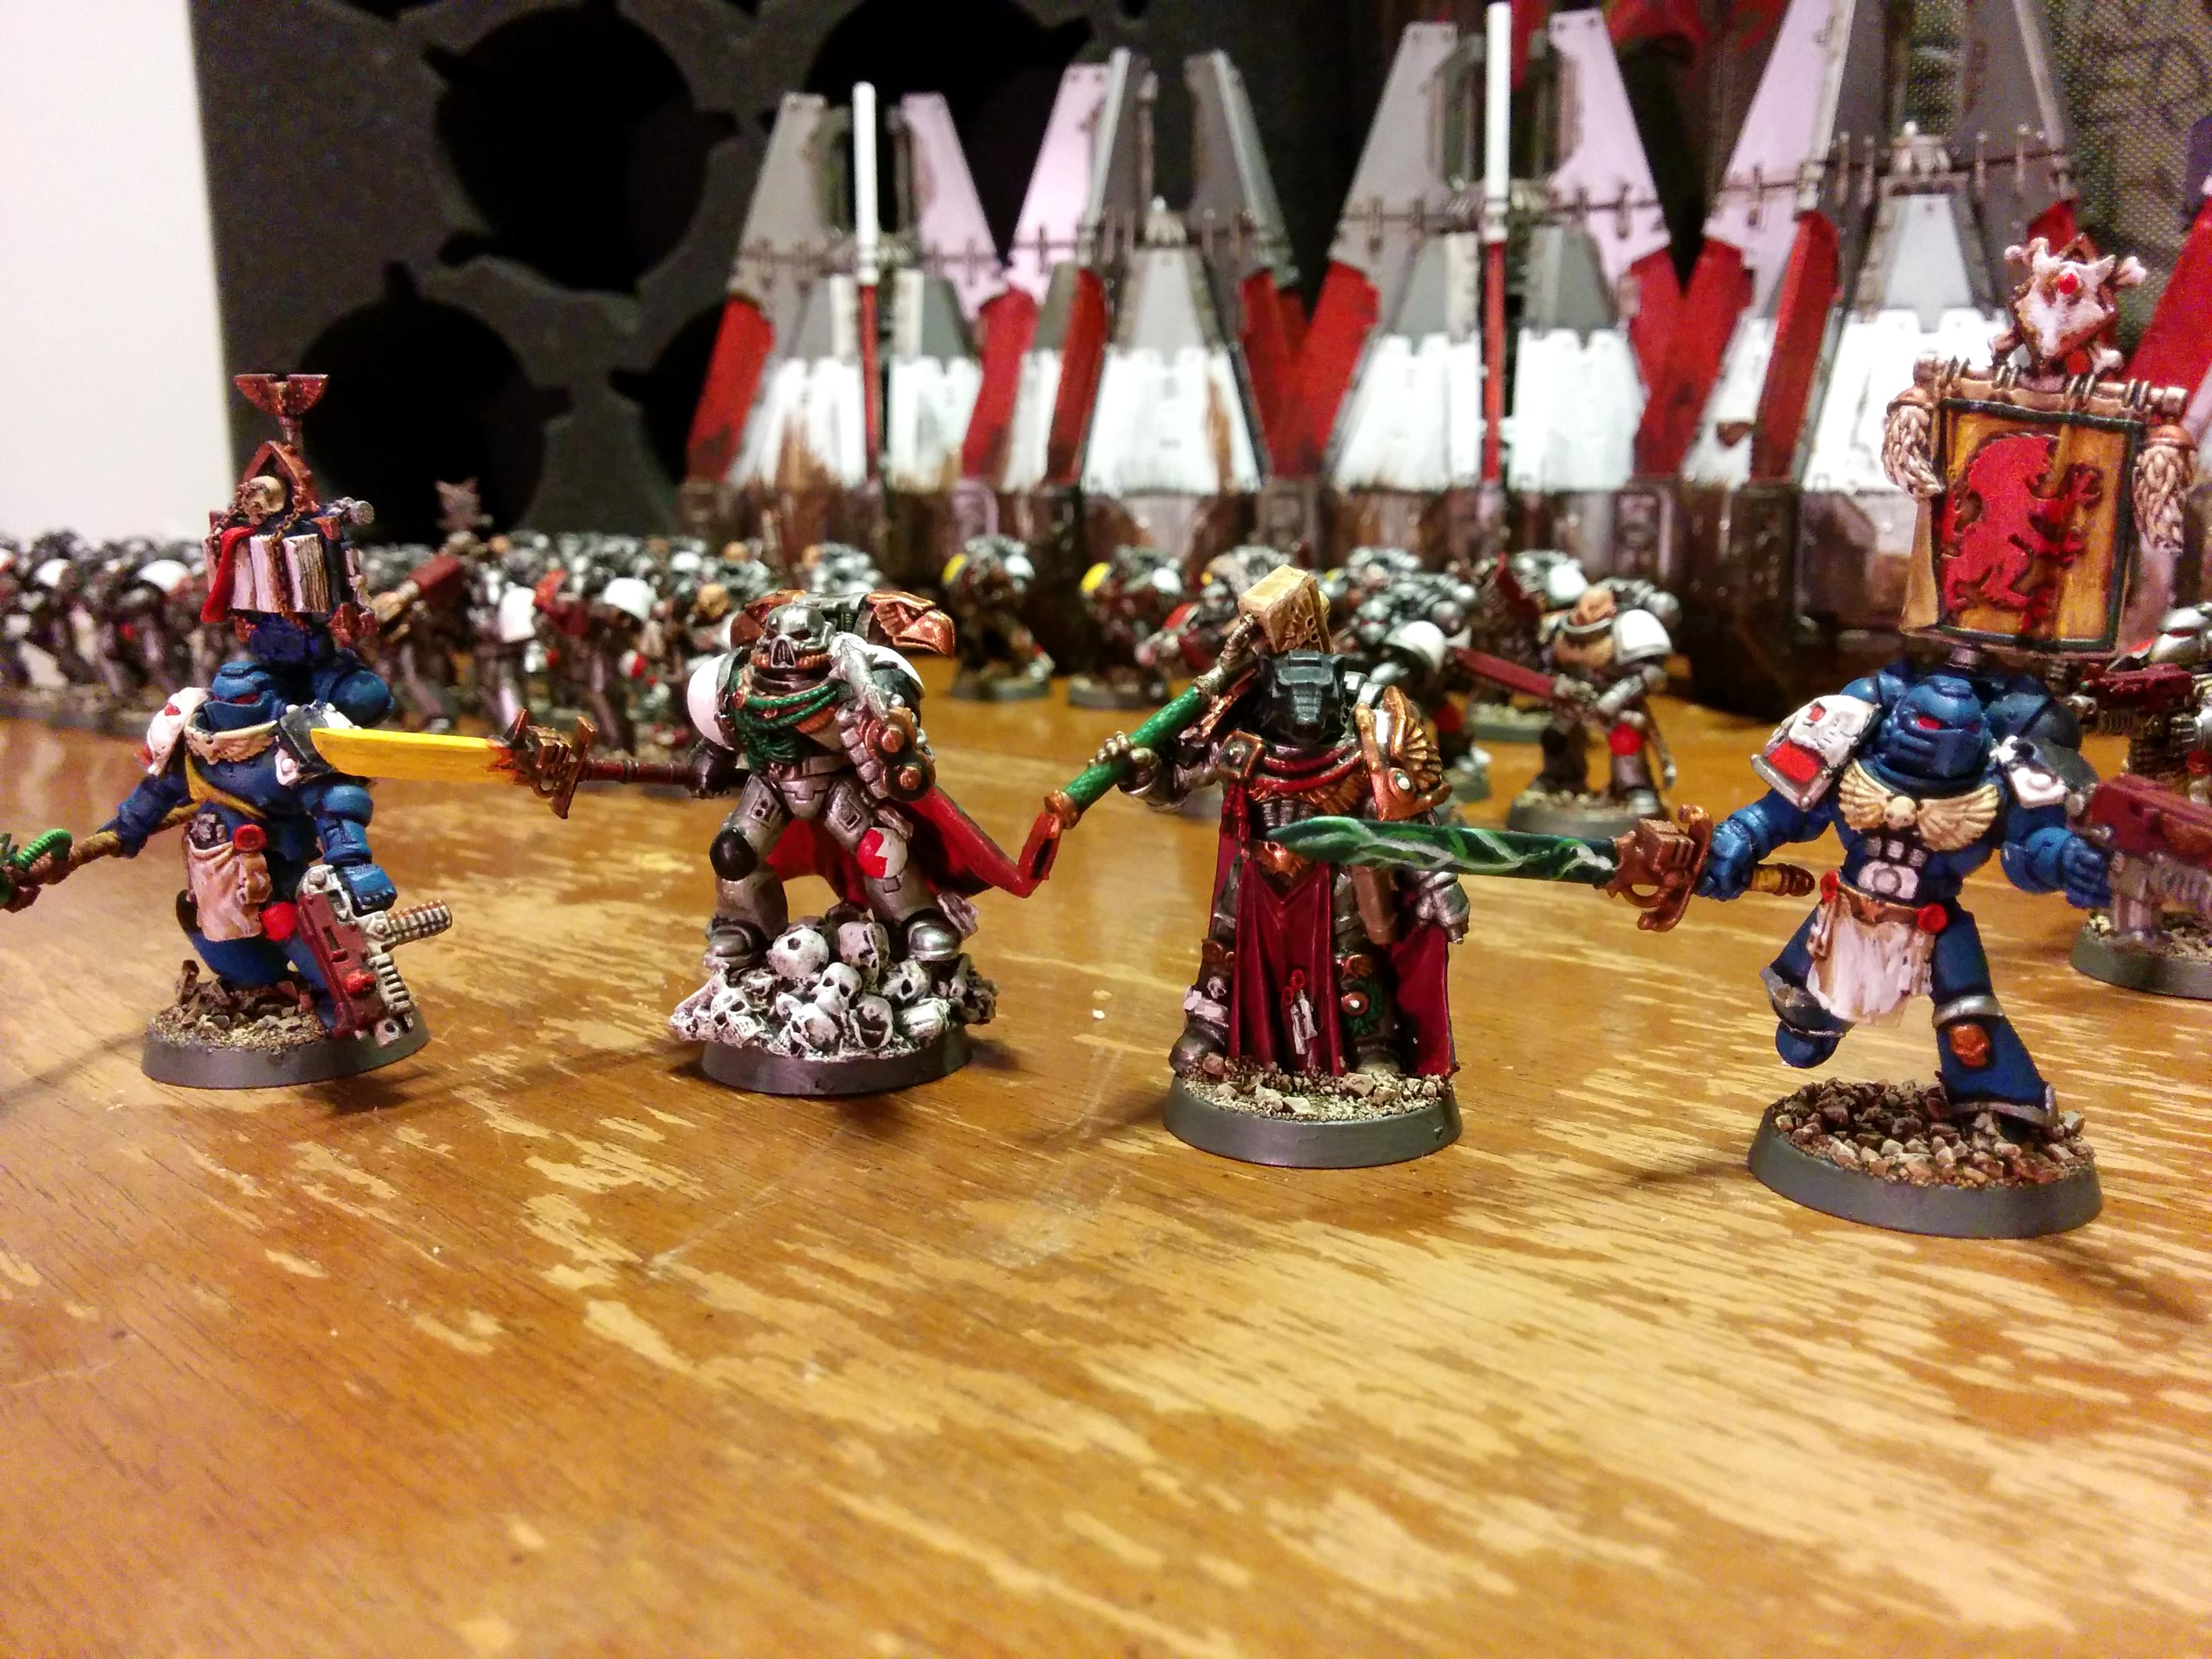 Captain, Chapter Master, Drop Pods, Forge World, Kitbash, Librarian, Pre-heresy, Salamanders, Space Wolves, Vulkan